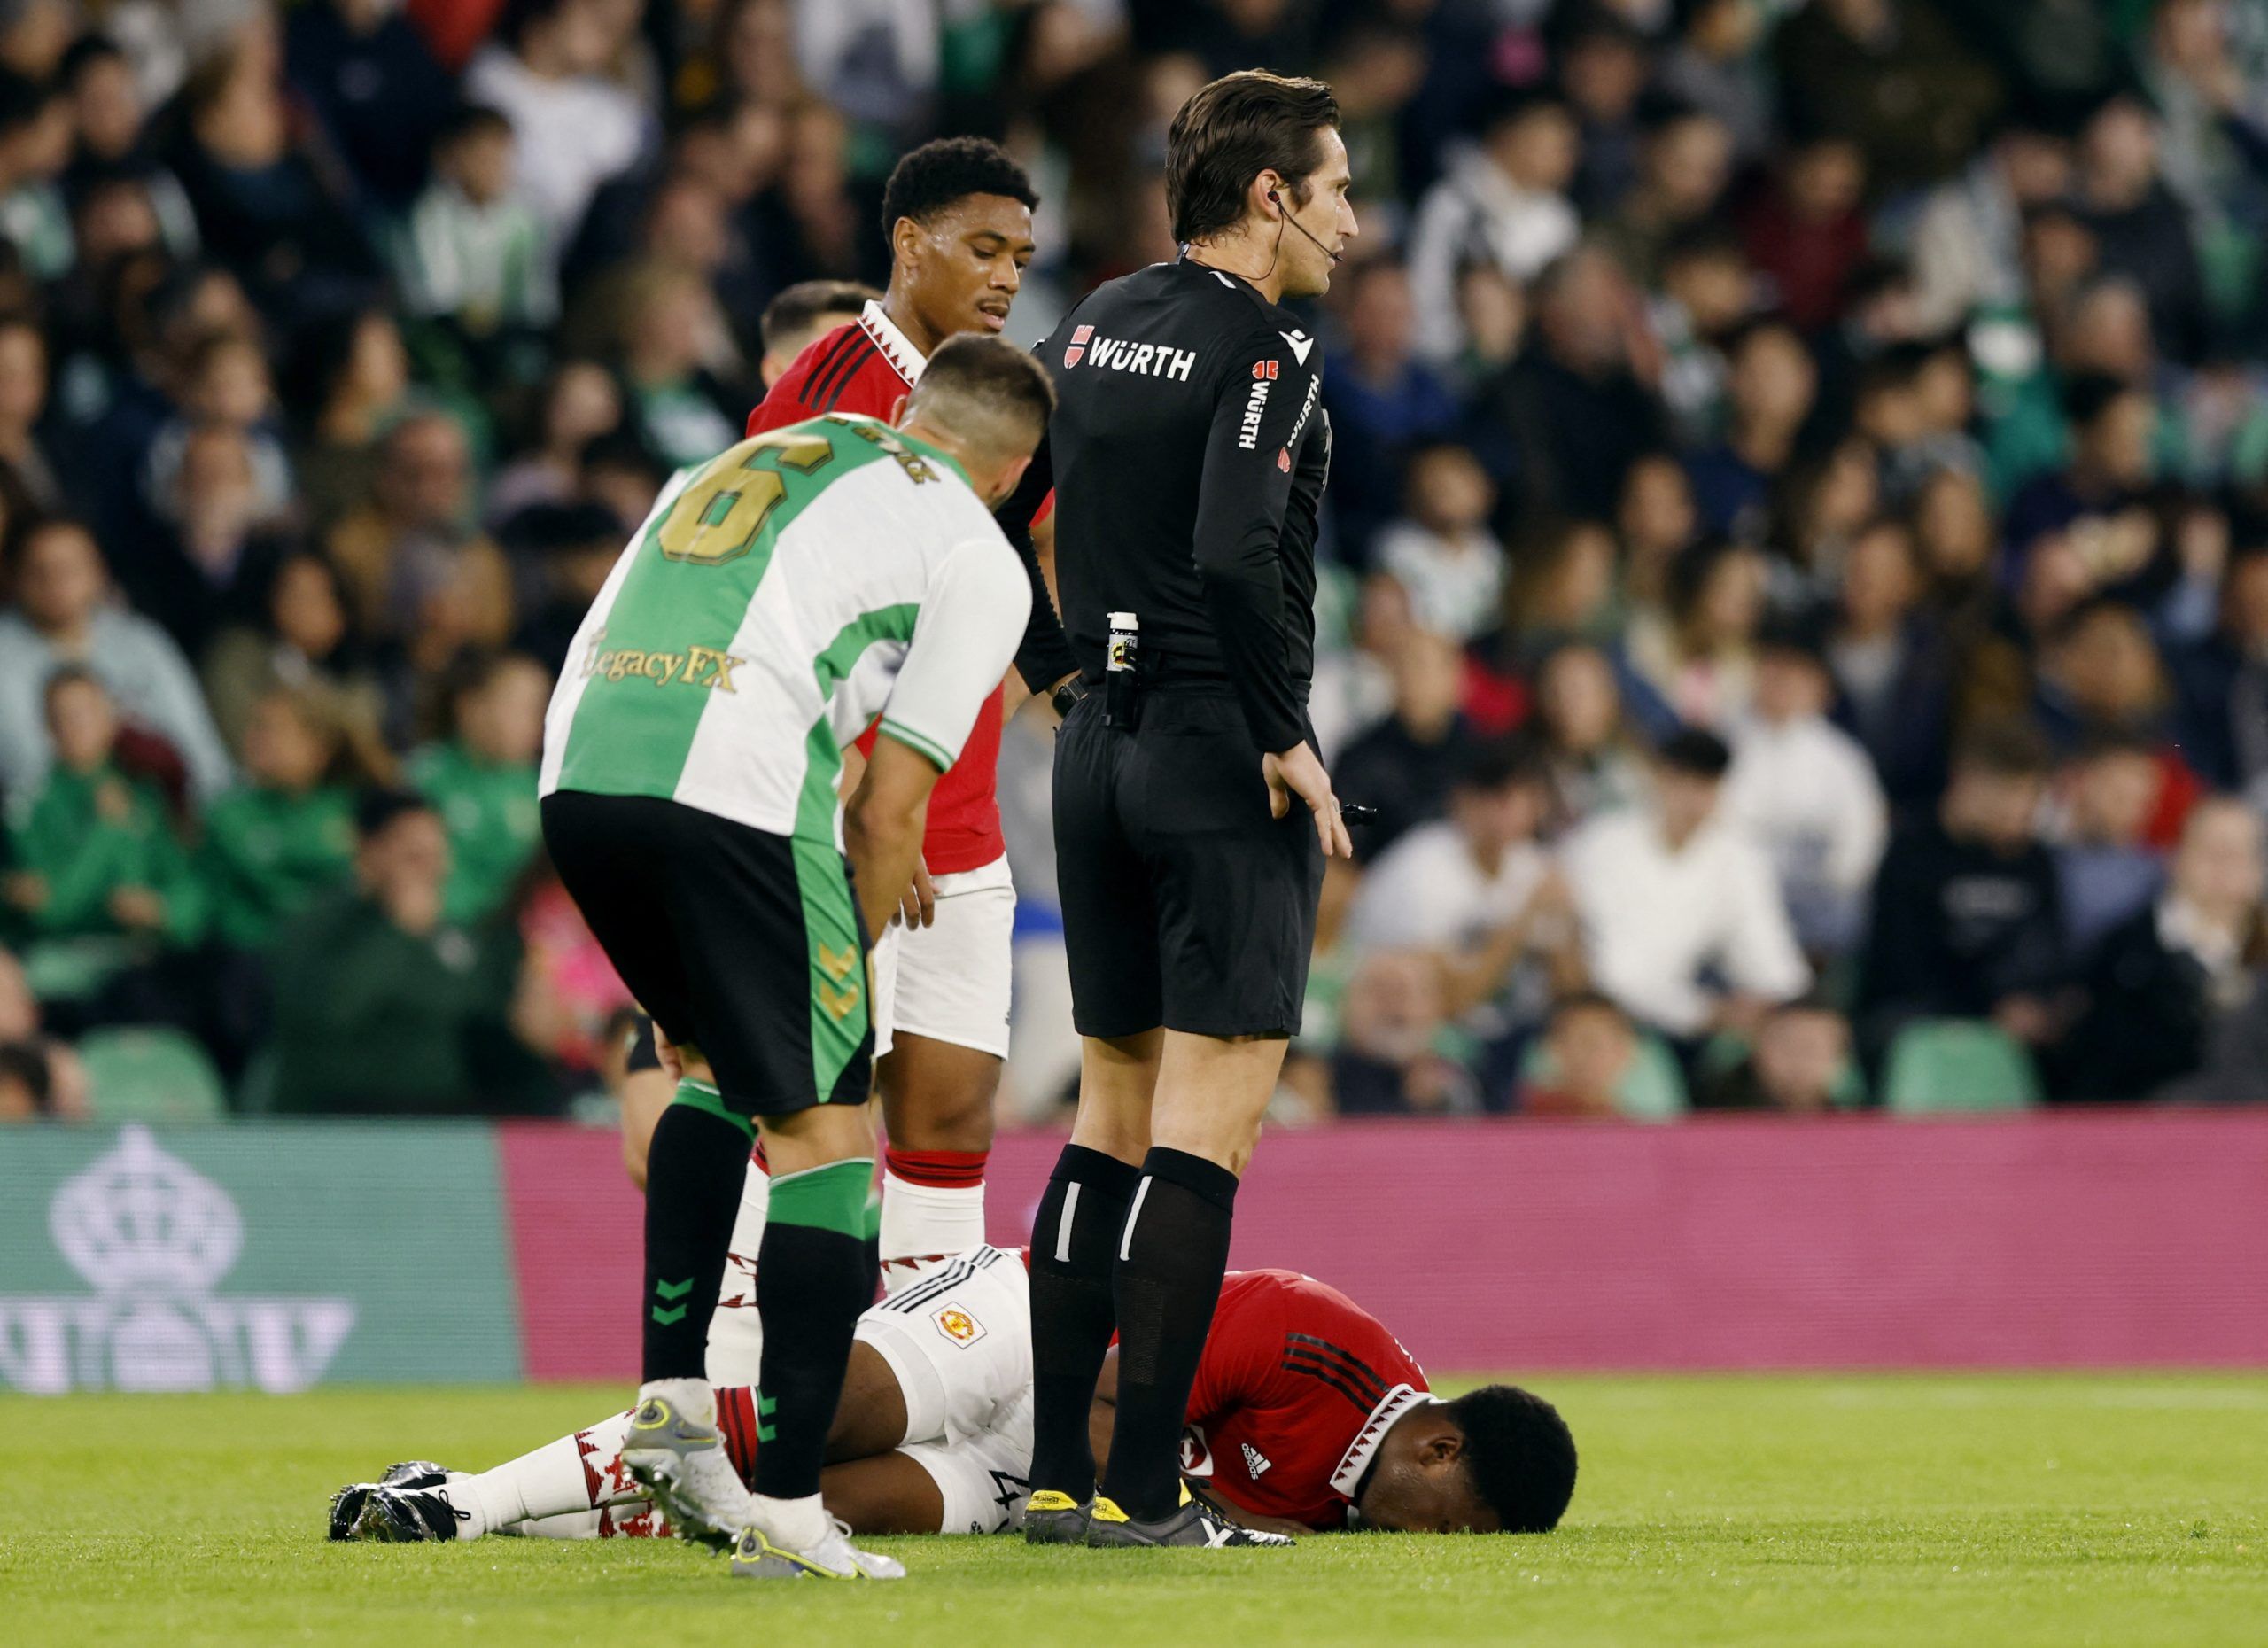 Soccer Football - Friendly - Real Betis v Manchester United - Estadio Benito Villamarin, Seville, Spain - December 10, 2022  Manchester United's Teden Mengi goes down after sustaining an injury as Anthony Martial, referee Jose Luis Munuera Montero and Real Betis' Victor Ruiz look on  REUTERS/Marcelo Del Pozo